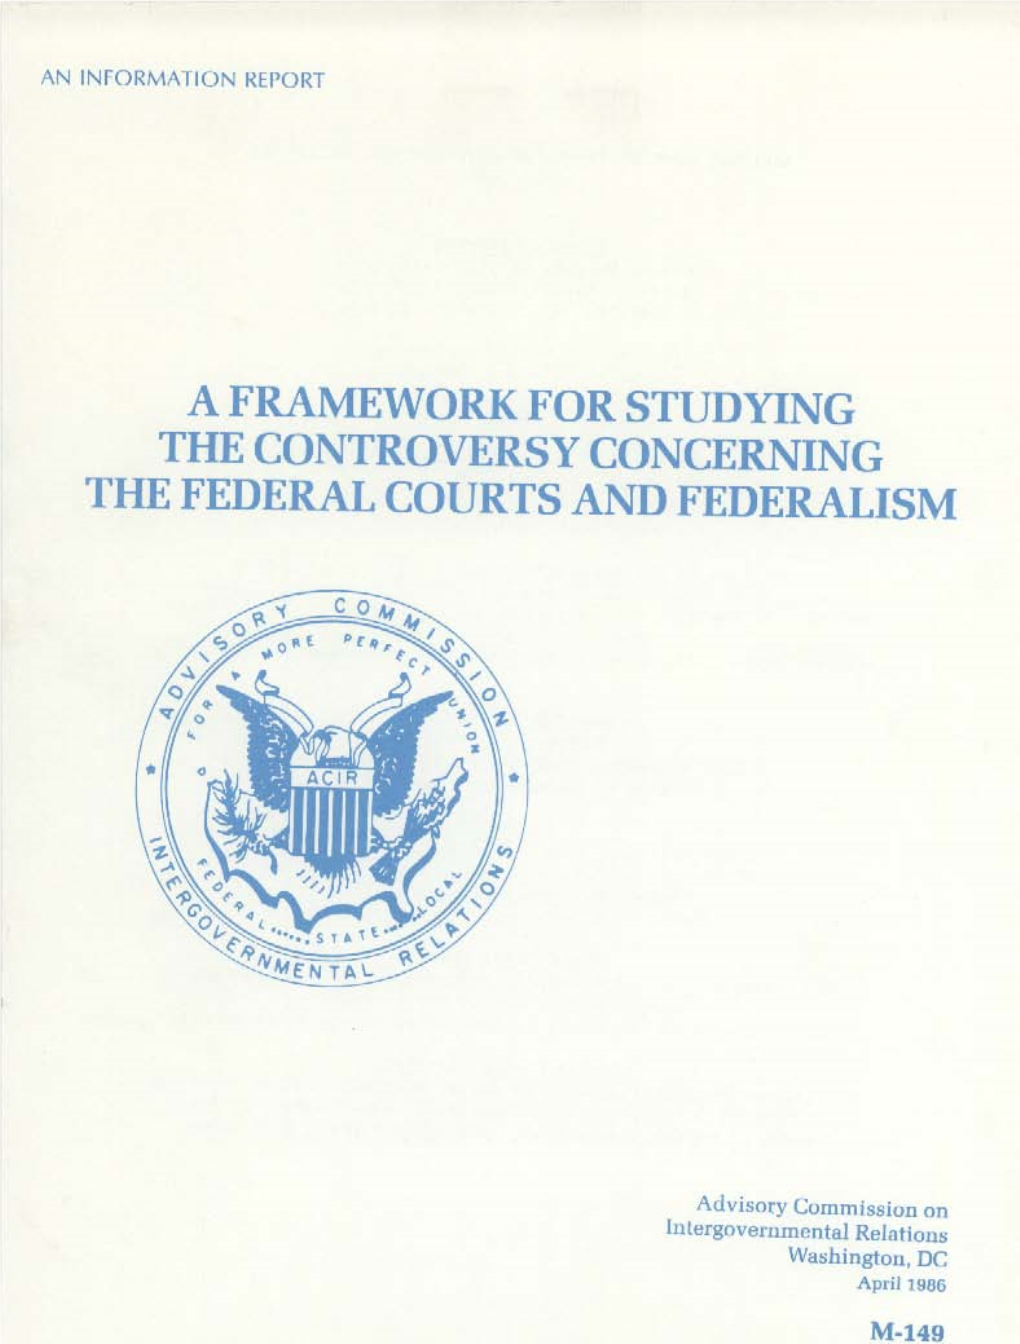 A Framework for Studying the Controversy Concerning the Federal Courts and Federalism